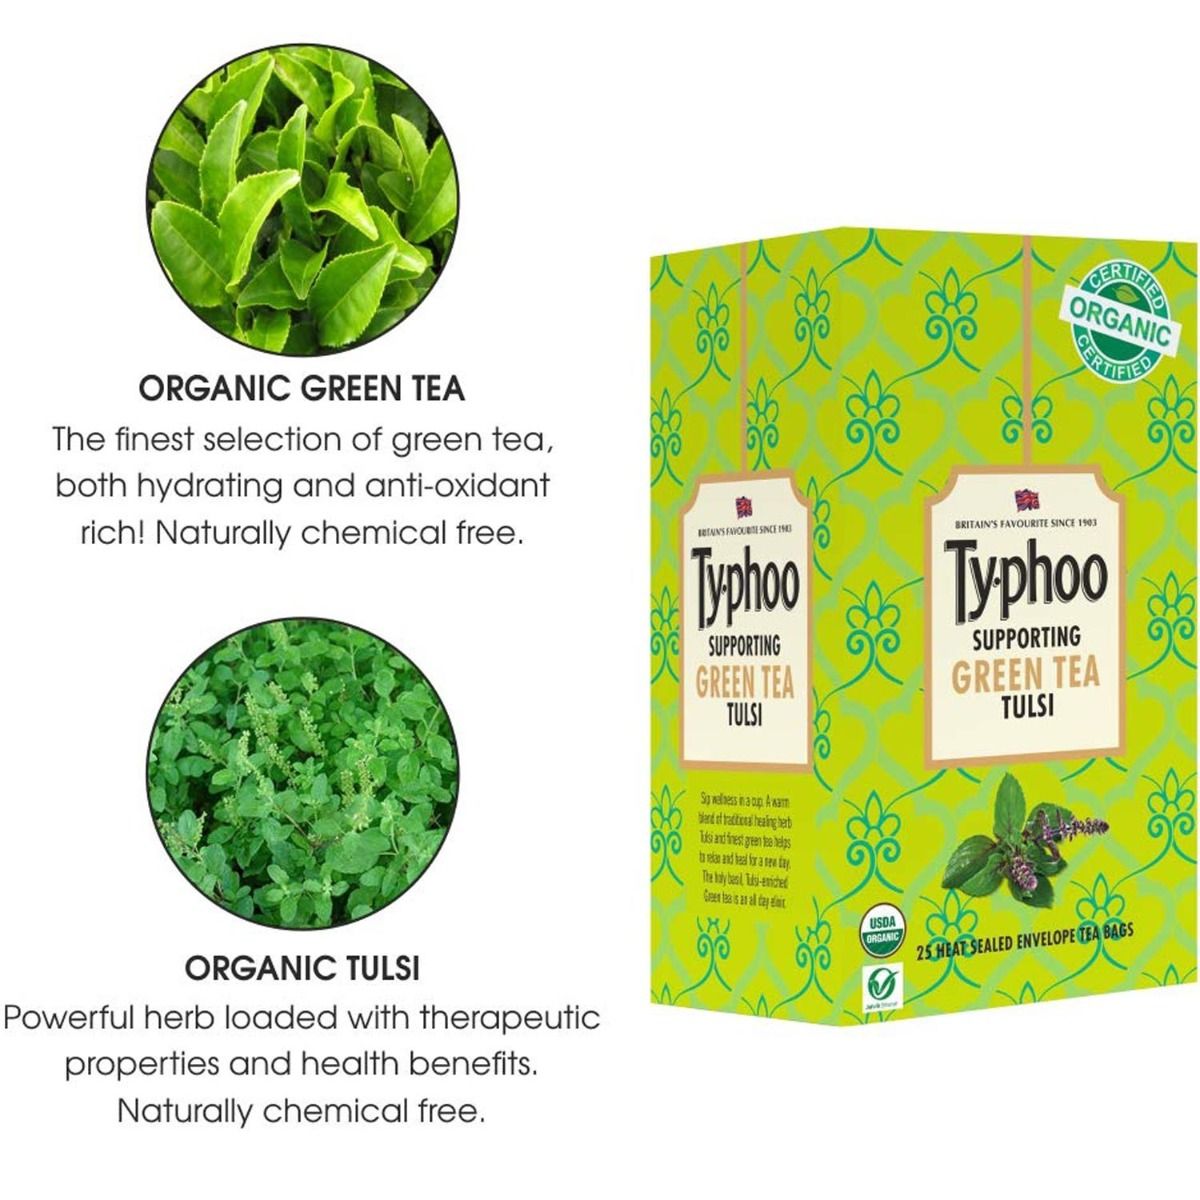 Ty.phoo Supporting Green Tea Tulsi Bags, 25 Count, Pack of 1 